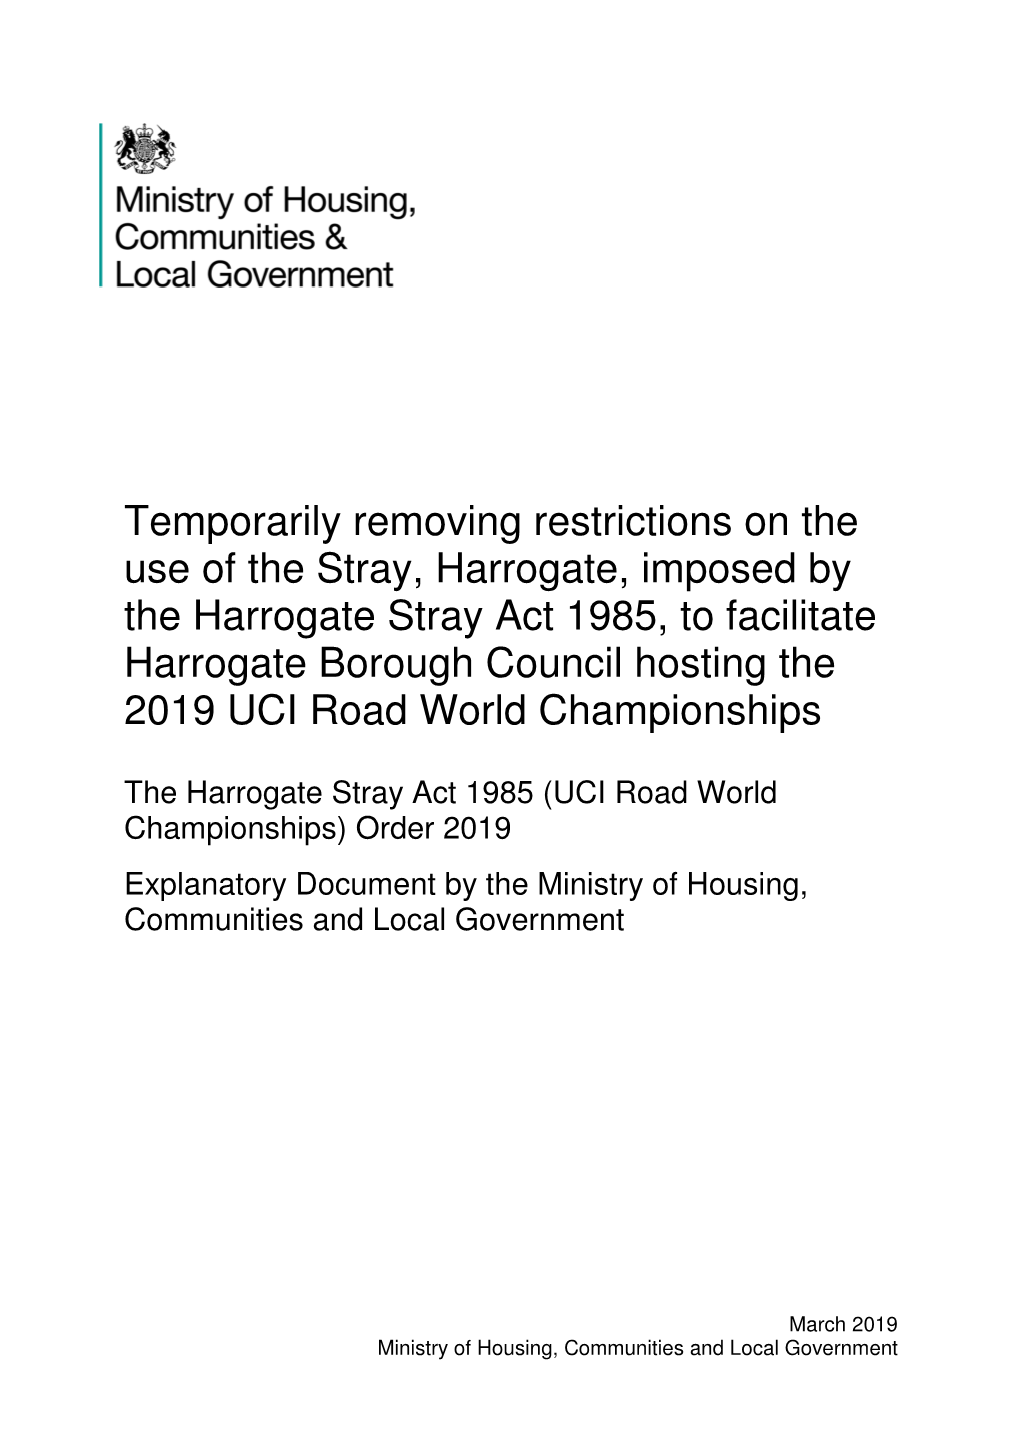 The Harrogate Stray Act 1985, to Facilitate Harrogate Borough Council Hosting the 2019 UCI Road World Championships